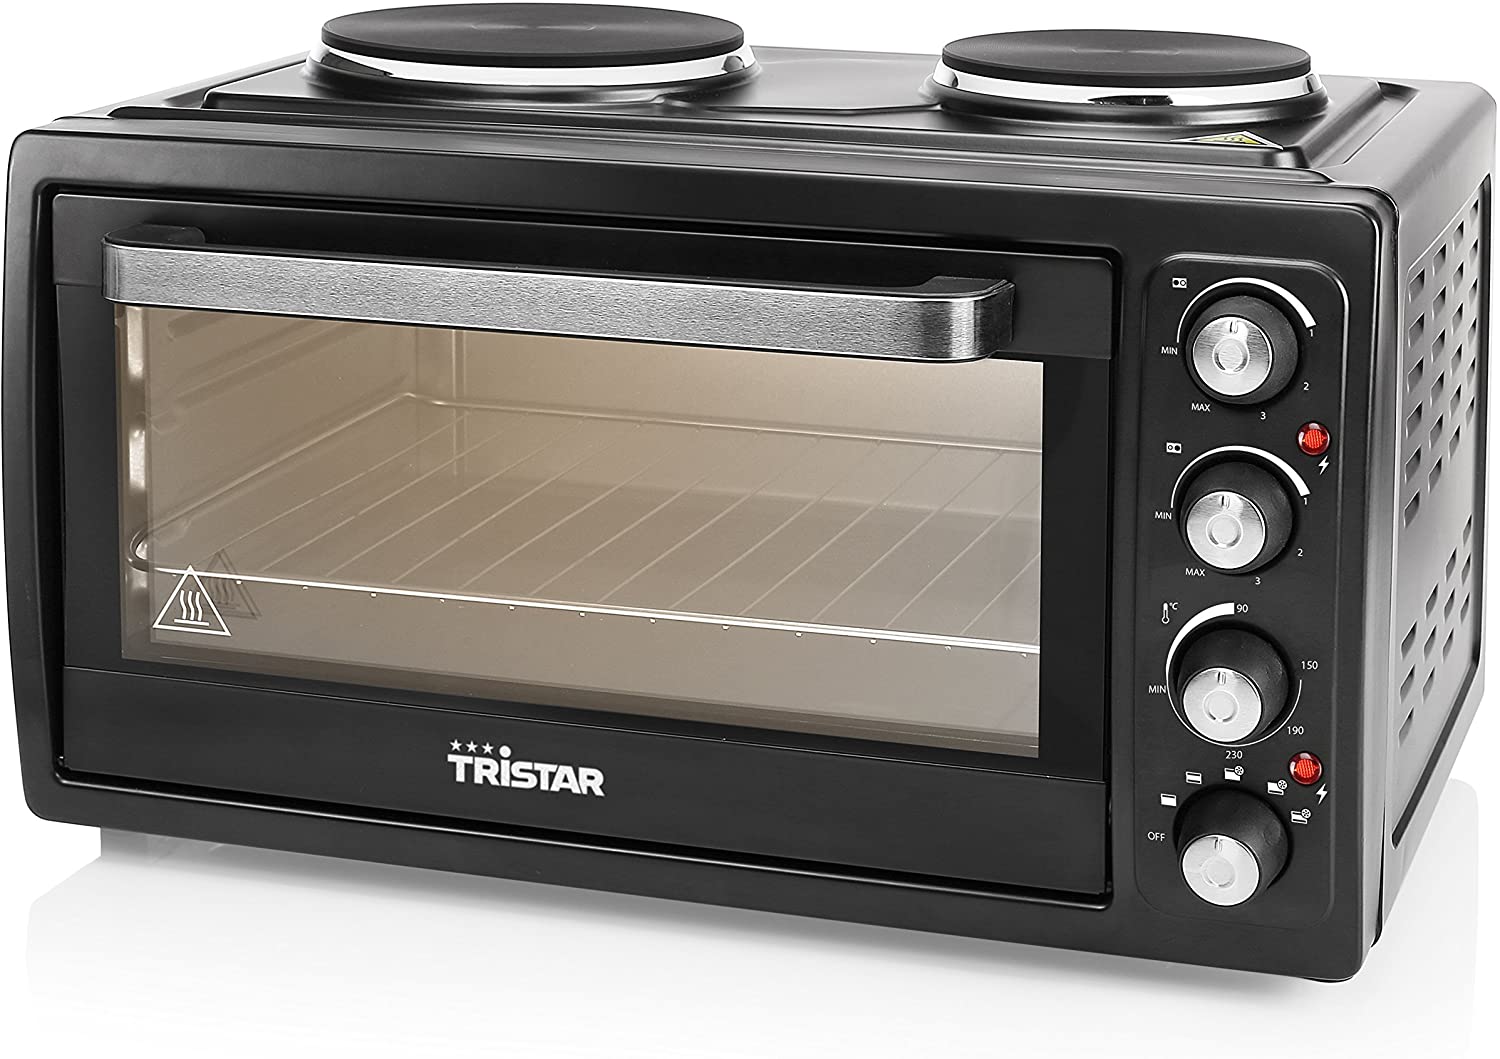 Tristar Ov 1443 Convection Oven with Double Hotplate, 38 Litre, 3100 Watts